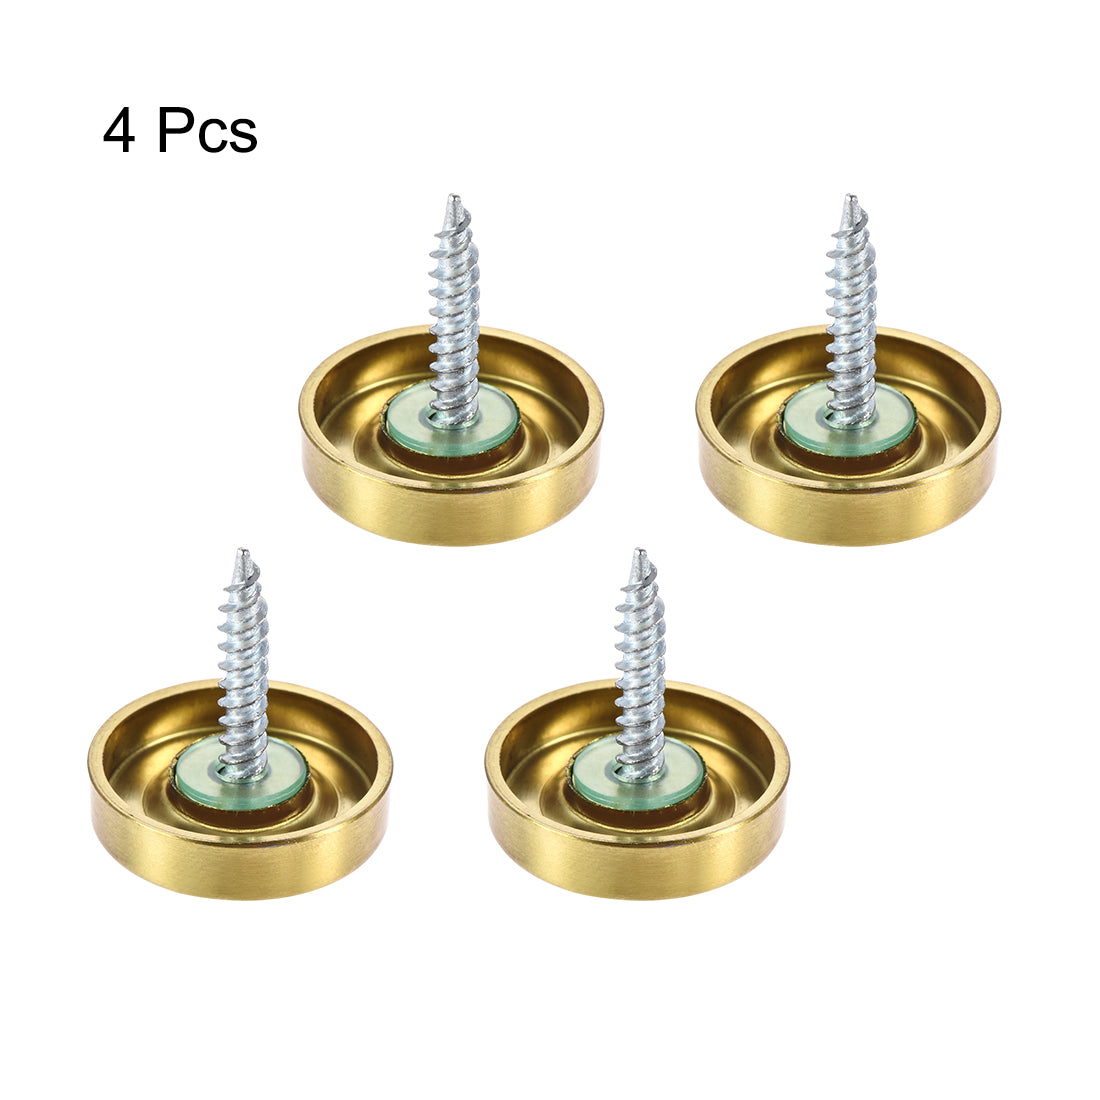 Uxcell Uxcell Mirror Screws, Decorative Cap Fasteners Cover Nails, Electroplated Wire Drawing, Golden 22mm/0.87" 4pcs